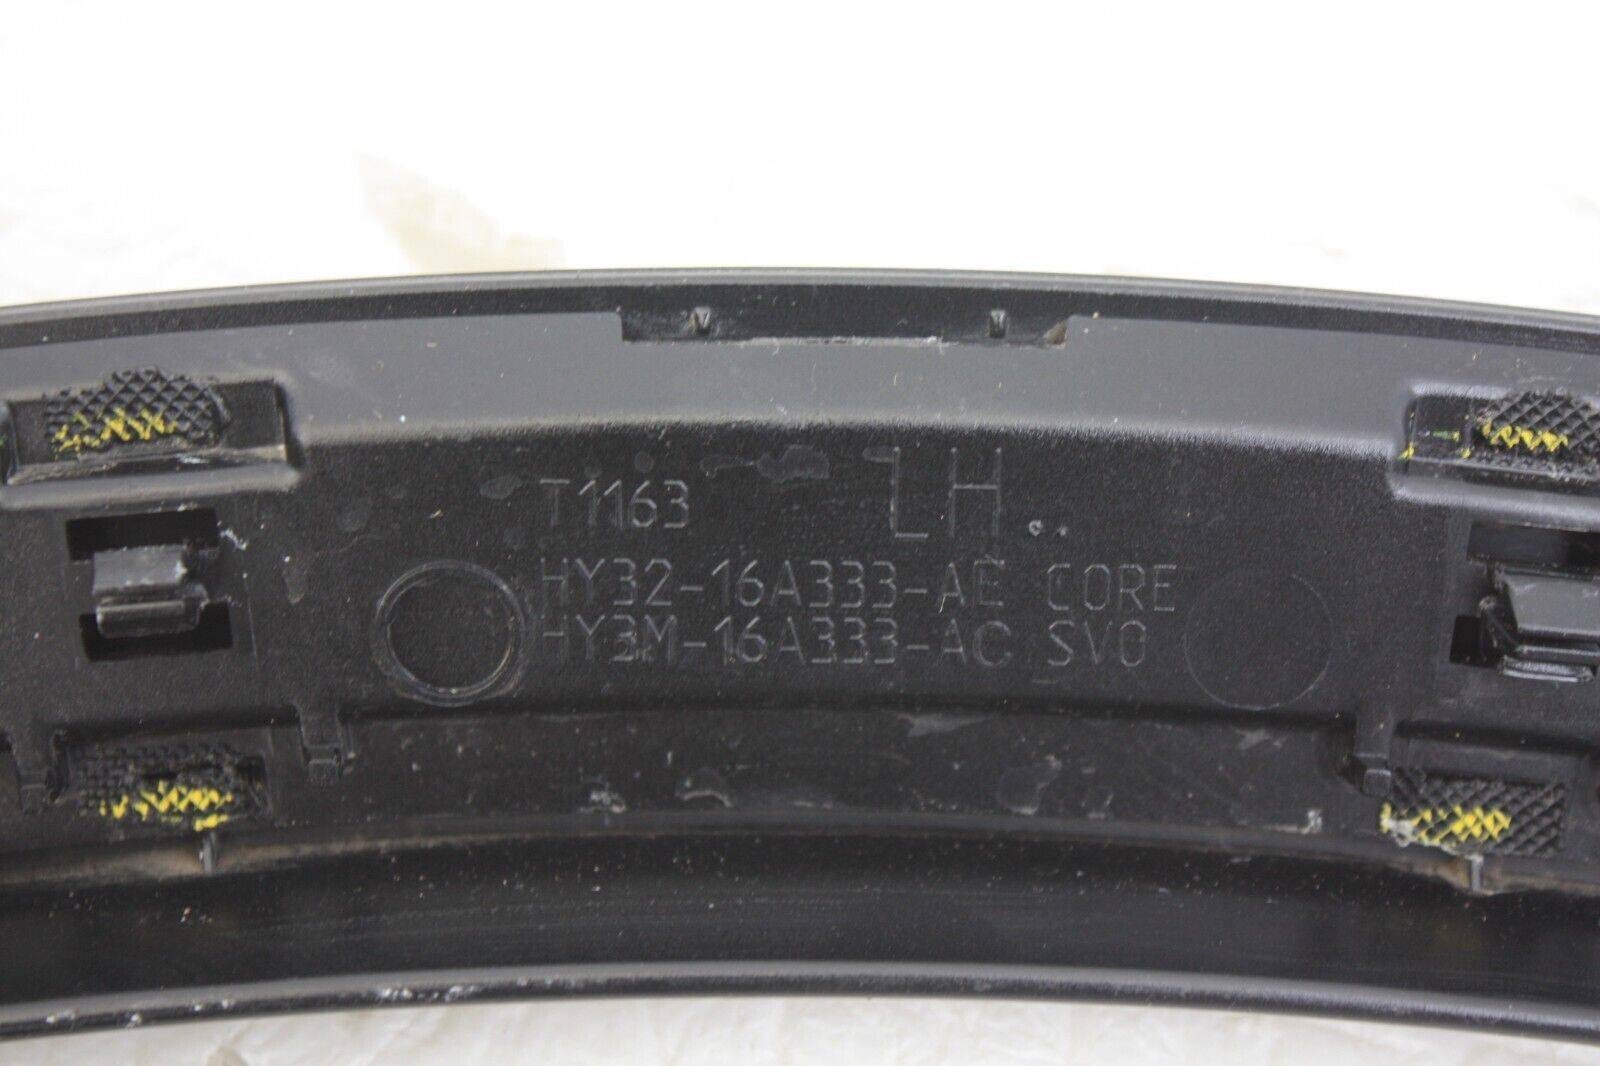 Land-Rover-Discovery-L462-Rear-Left-Side-Wheel-Arch-HY32-16A333-AE-Genuine-176438631881-10